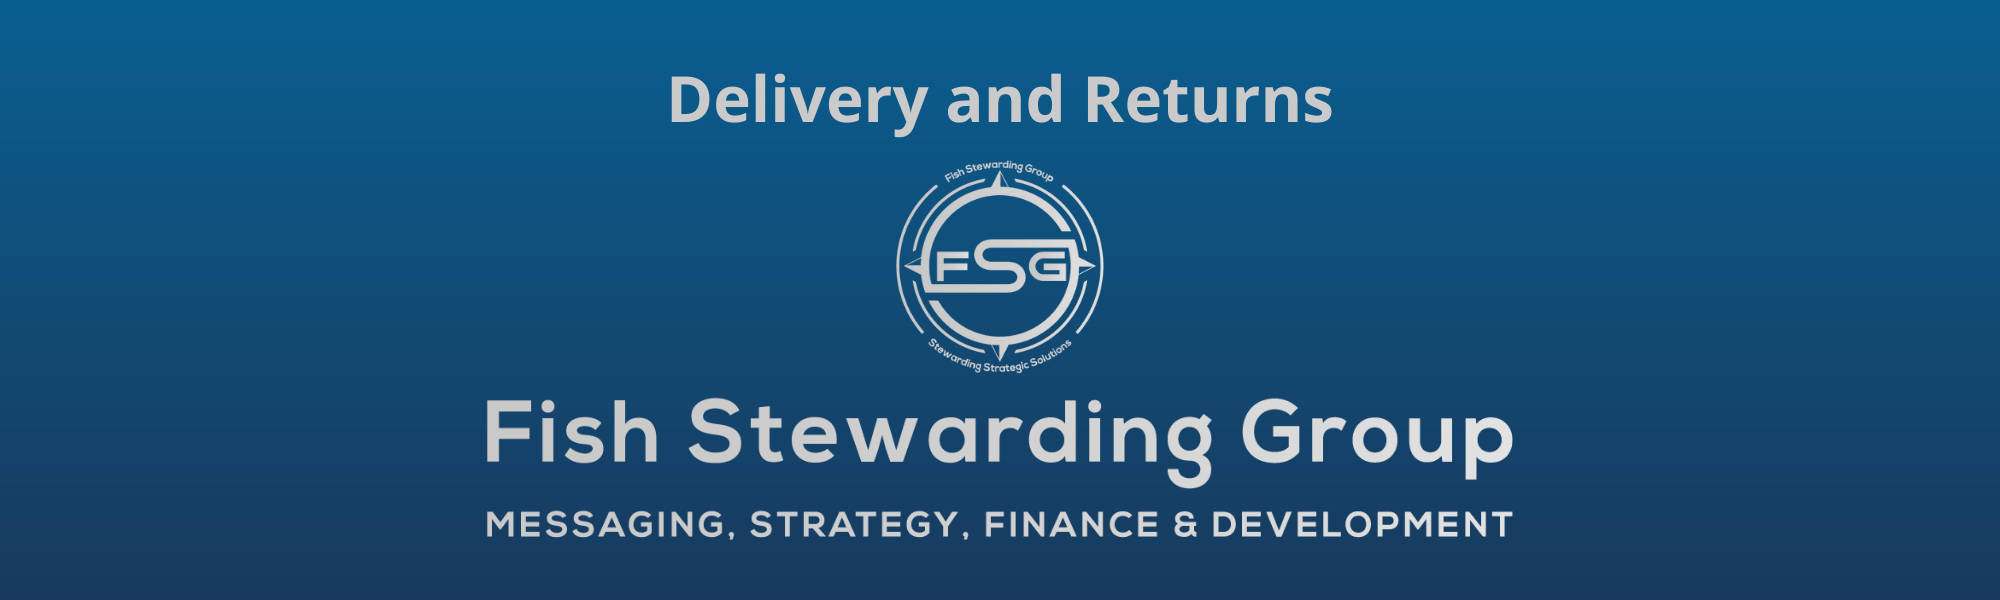 A thin rectangular Footer graphic for the Delivery and Returns page. The background is a blue gradient color that goes from a dark blue on the bottom to a lighter blue on top. The text in gray on top reads Delivery and Returns and FAQs. The text in gray on the bottom center reads: Fish Stewarding Group and beneath that, the text reads Messaging, Strategy, Finance and Development. In the center above the text is the FSG logo in gray. The logo has the letters FSG in the middle with a circle with four pointed arrows facing north, south, east and west with the S connected to that circle. Four rounded lines make the next circle of the circle and the last layer is a thin circle with the text on the Bottom that reads Stewarding Strategist Solutions and on top, the text reads Fish Stewarding Group.